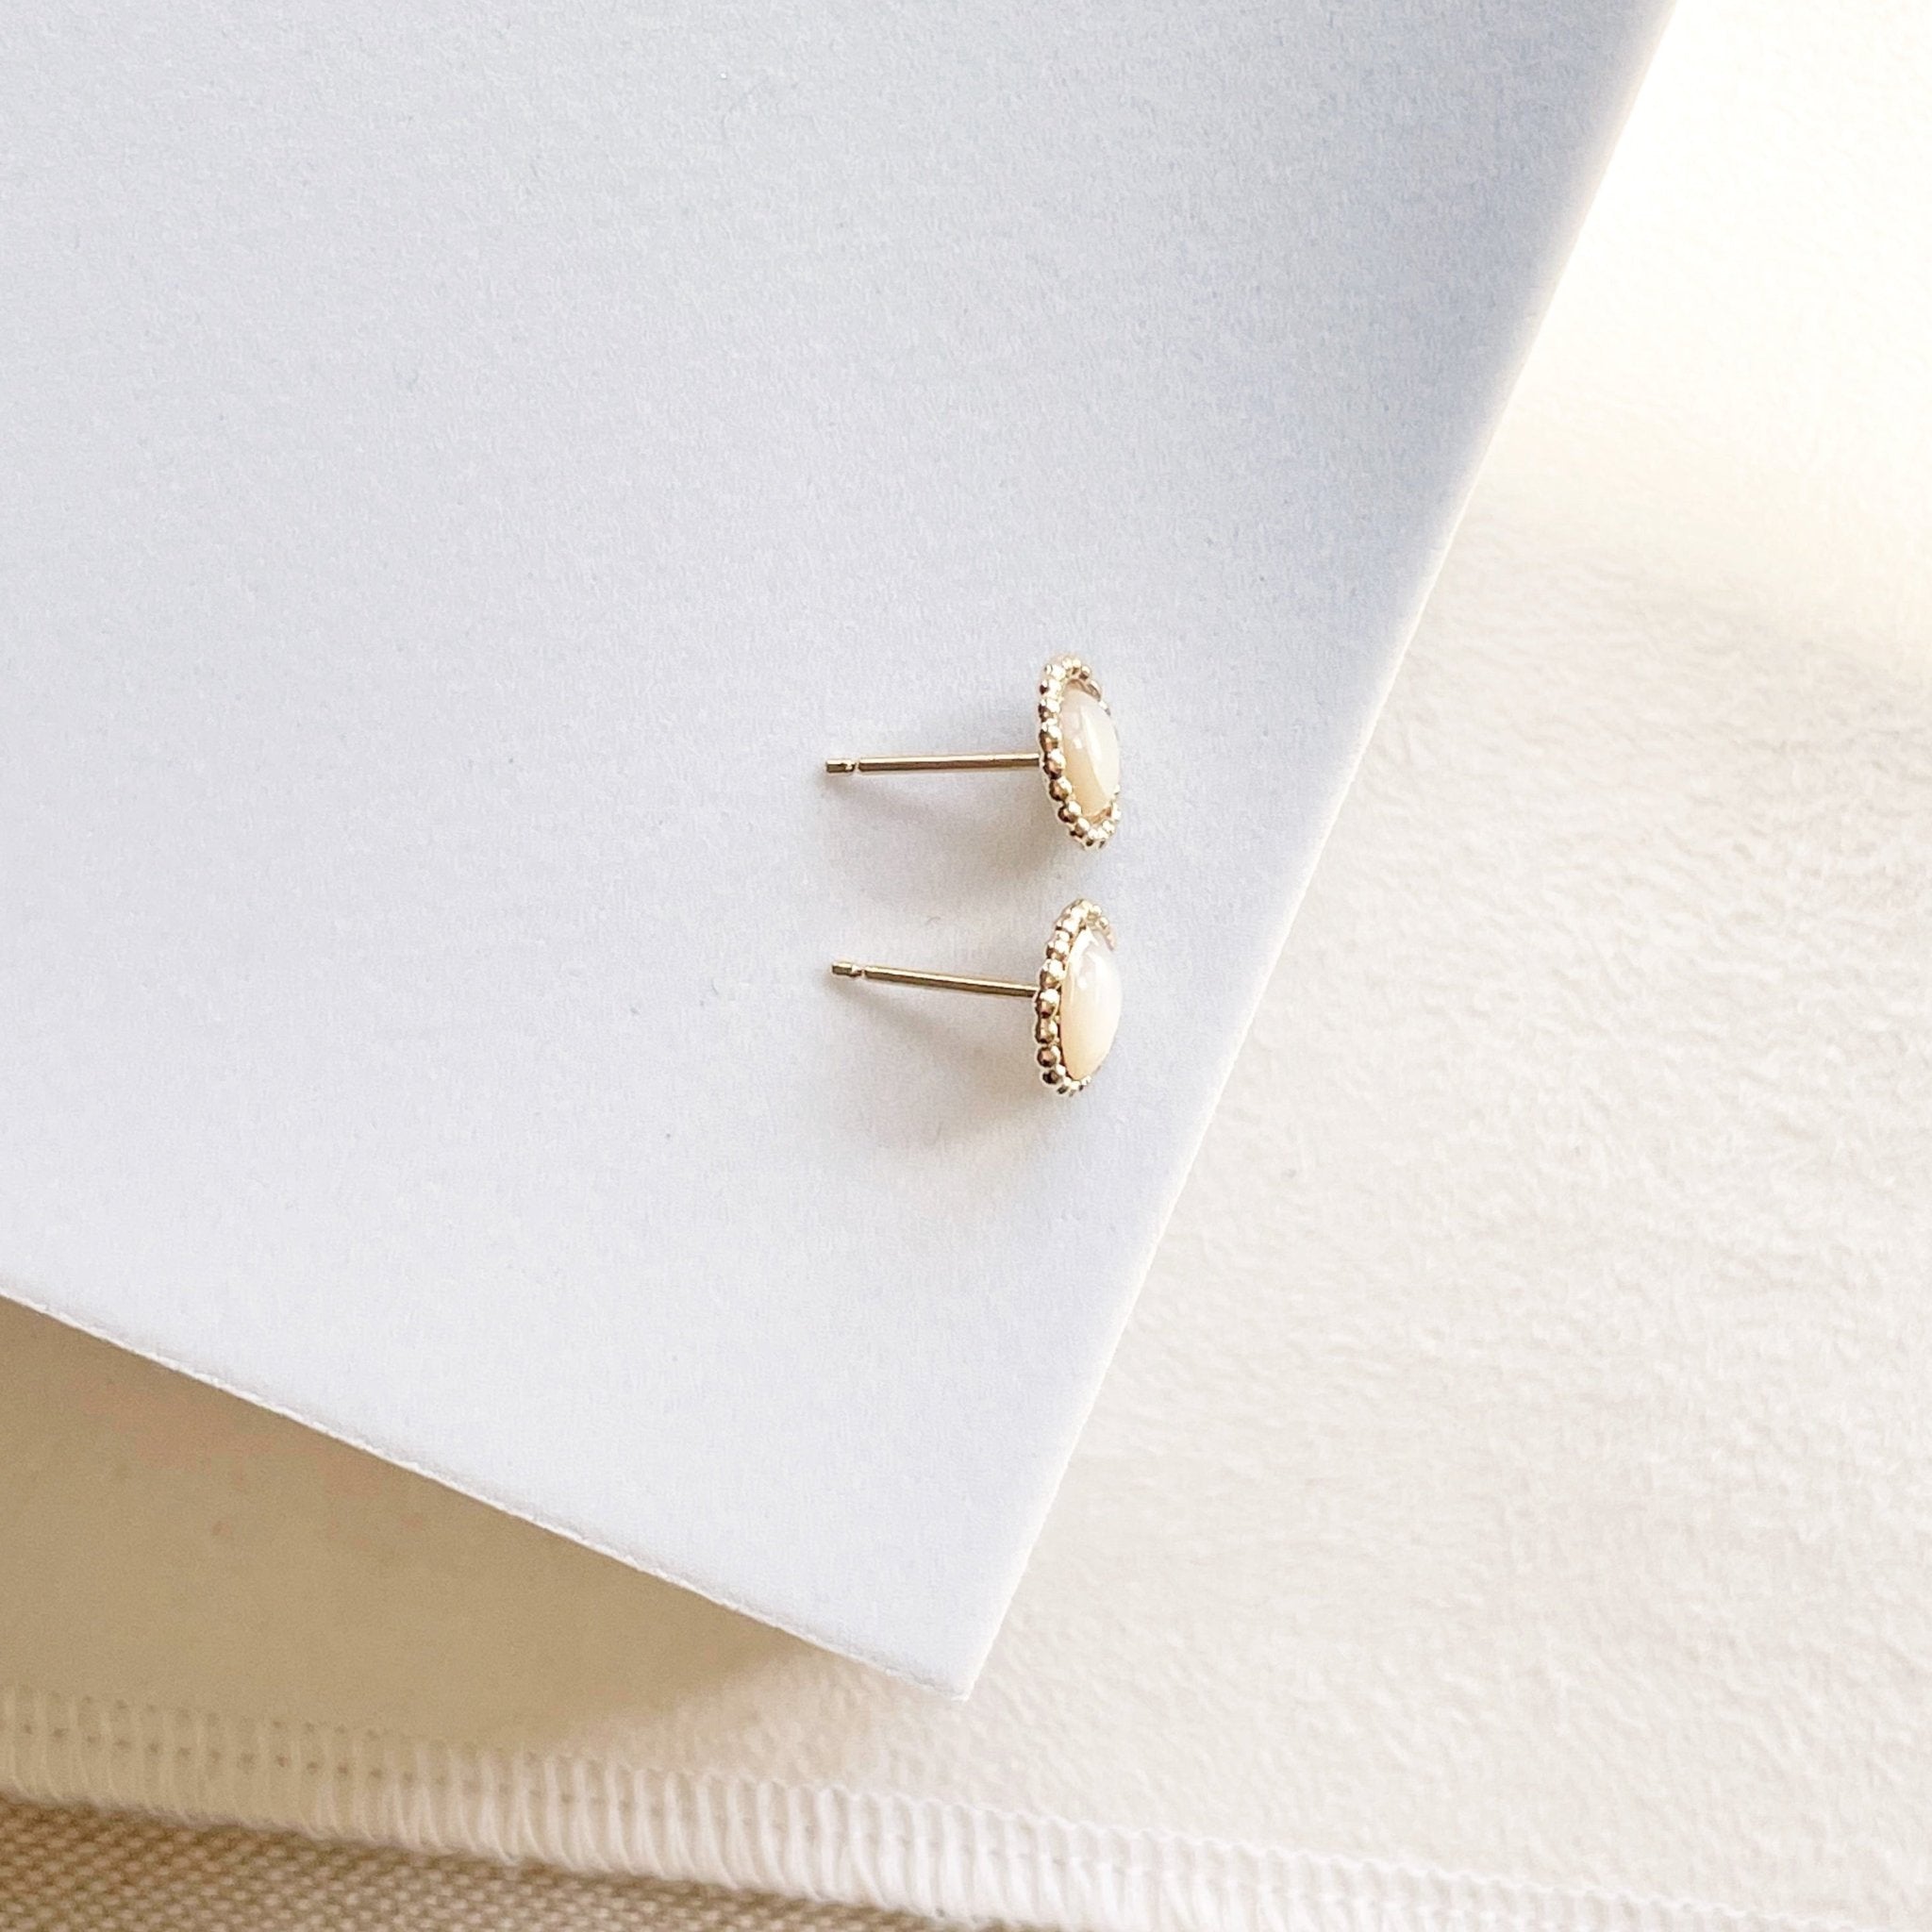 Side view of 6mm gold and mother of pearl stud earrings with a beaded bezel setting. Chantilly Studs by Sarah Cornwell Jewelry